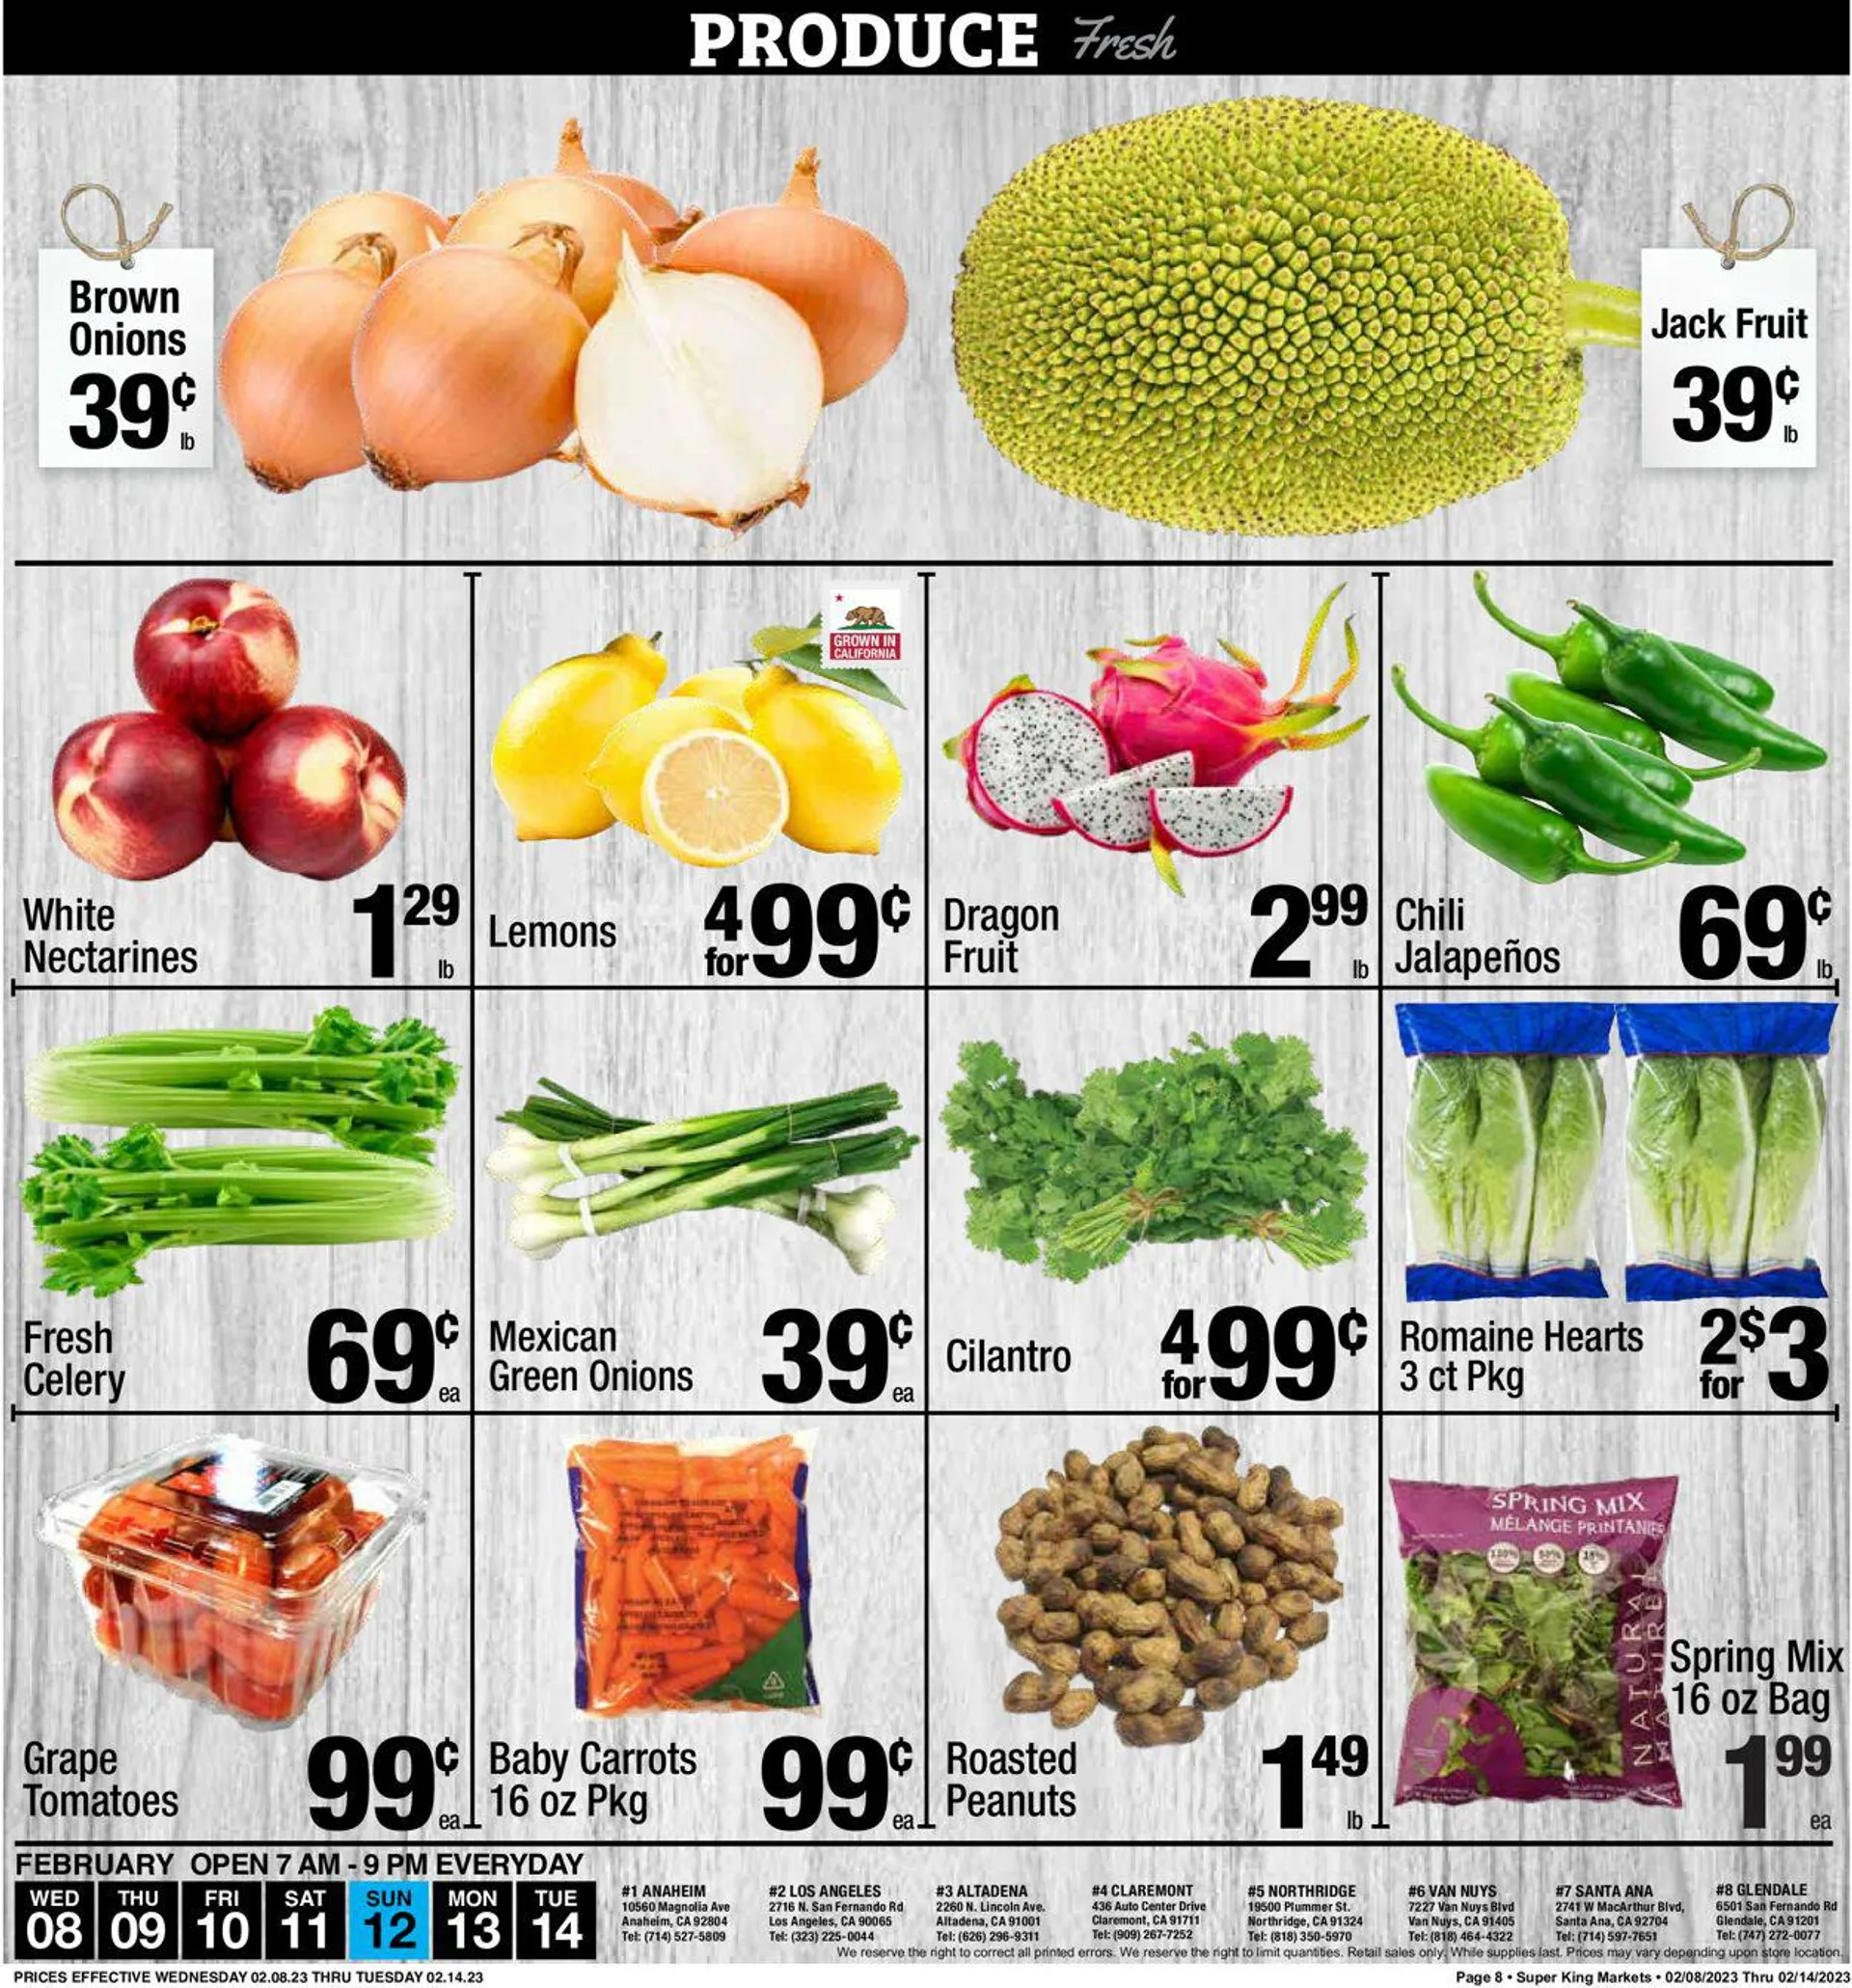 Super King Market Current weekly ad - 8